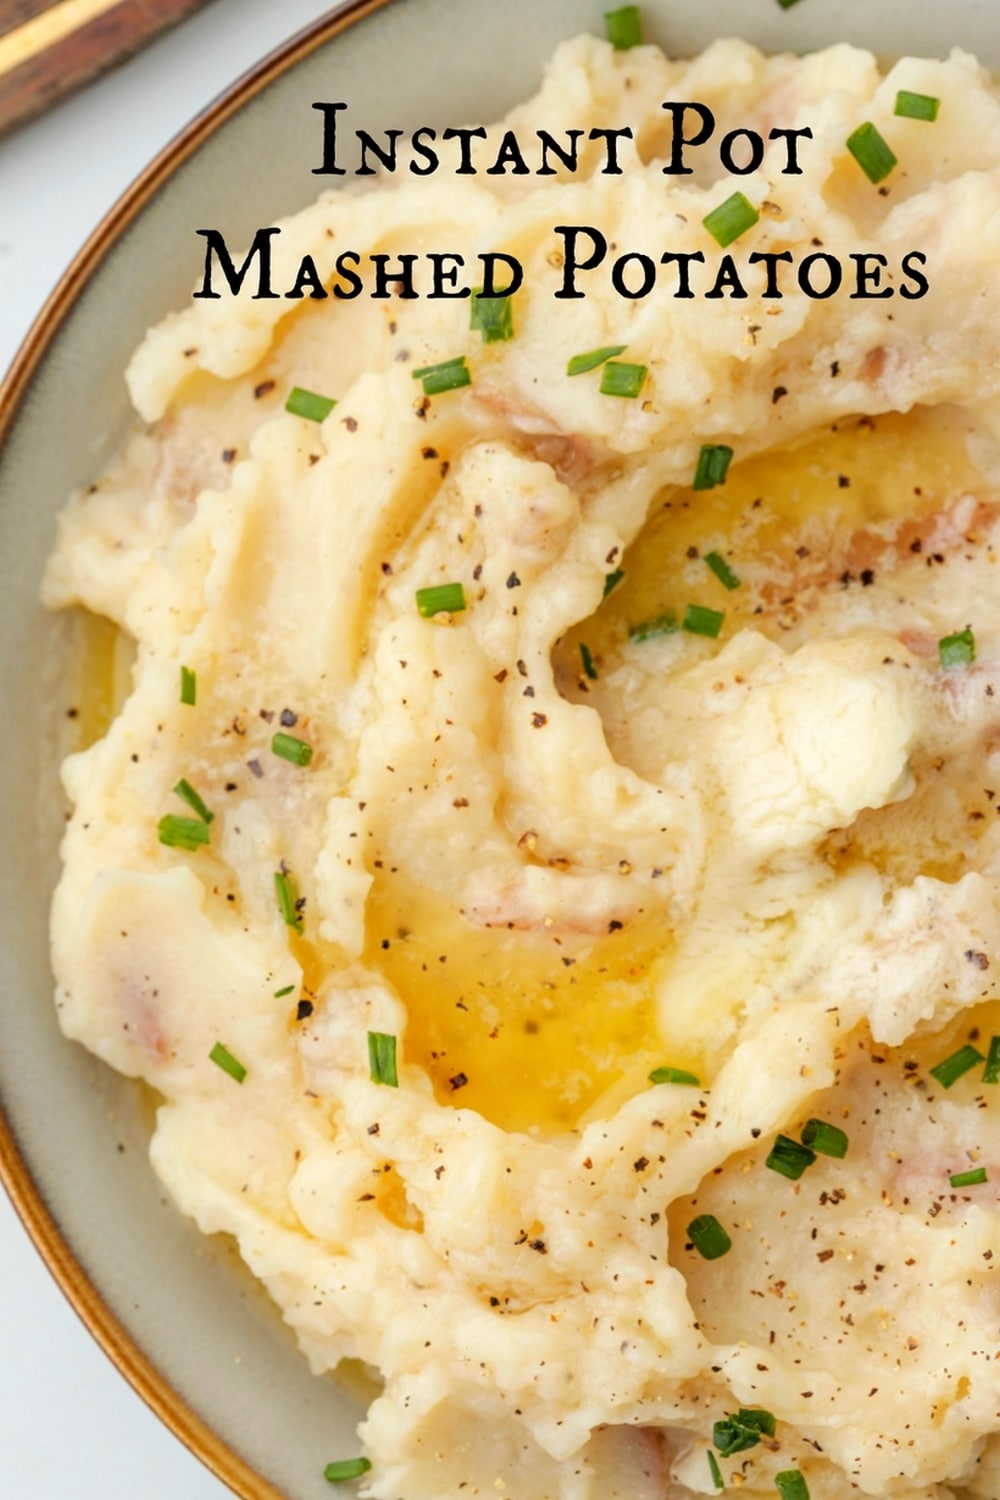 Instant Pot Mashed Potatoes are rich, creamy and flavorful in all the best ways. Using the pressure cooker is a tried-and-true method when it comes to making perfect mashed potatoes every time.
 via @cmpollak1